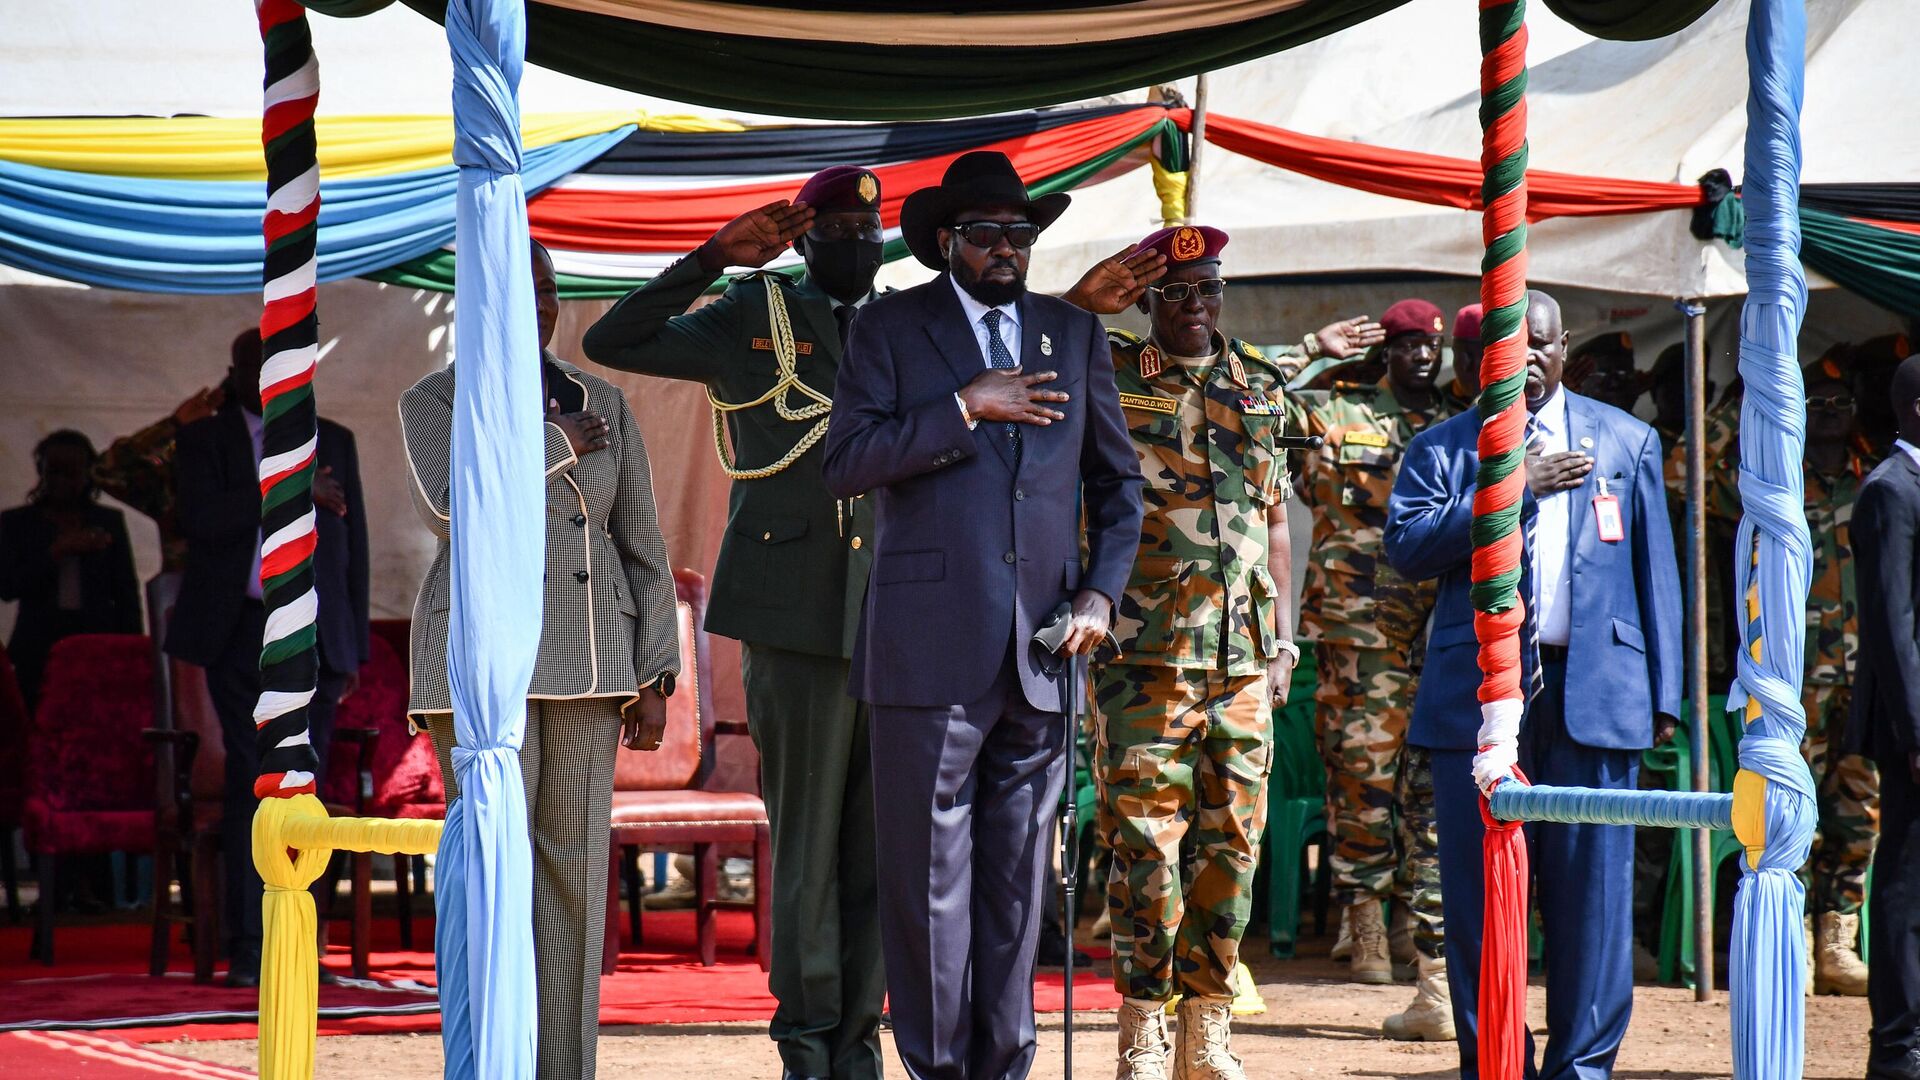 South Sudan’s President Salva Kiir (C) attends the departure ceremony of the South Sudan People's Defence Forces (SSPDF) as they are deployed to the Democratic Republic of Congo (DRC) at the SSPDF Headquarters in Juba on December 28, 2022. - South Sudan will send 750 soldiers to the eastern Democratic Republic of Congo soon to join a regional force fighting a rebel offensive, a military spokesman said Wednesday. - Sputnik International, 1920, 29.12.2022